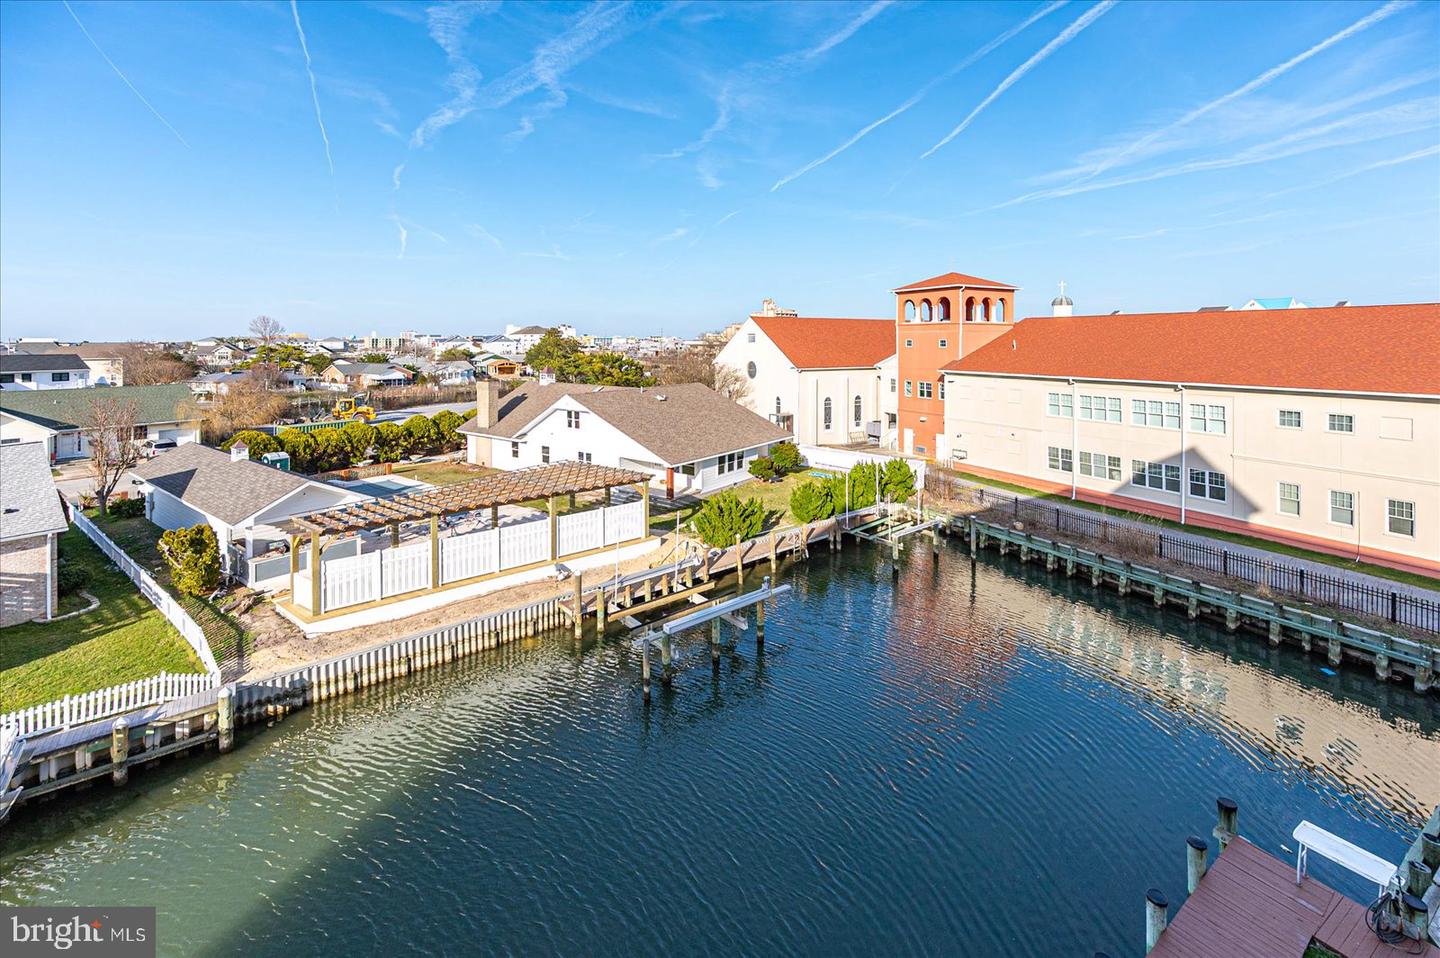 MDWO2019672-802922310384-2024-03-15-14-18-05 300 17th St #303 | Ocean City, MD Real Estate For Sale | MLS# Mdwo2019672  - 1st Choice Properties